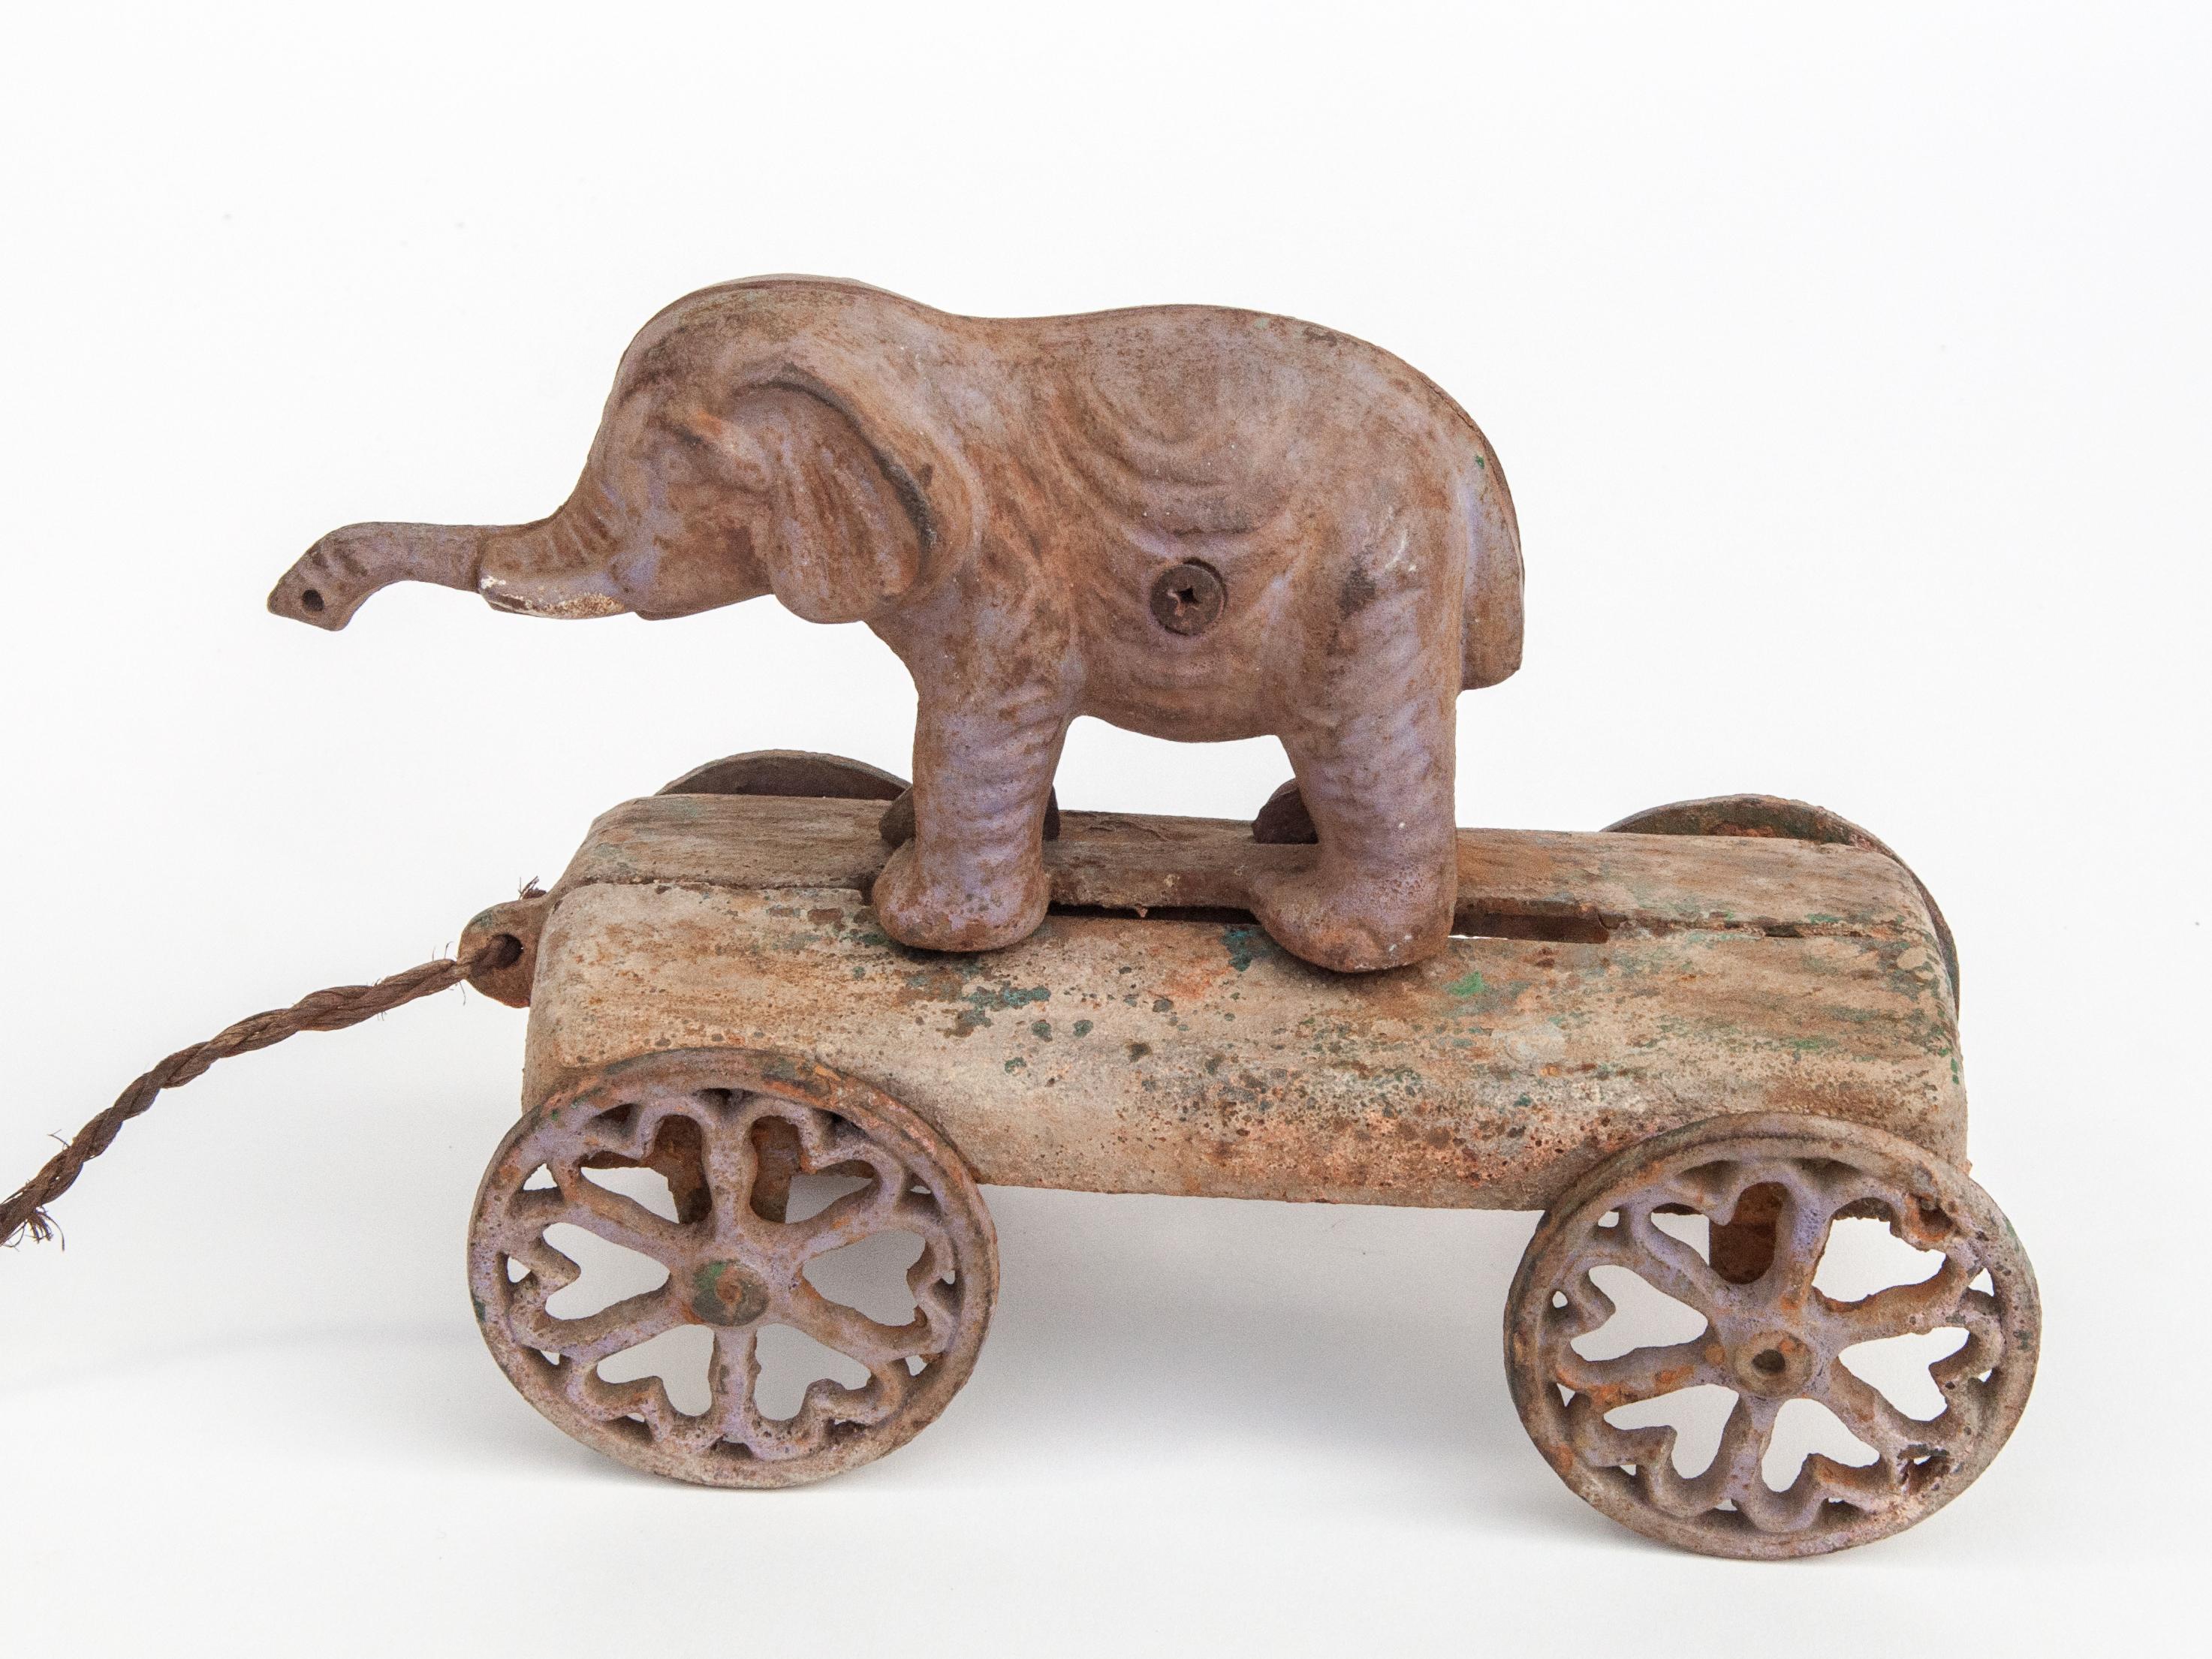 Vintage elephant pull toy. Cast Iron. Early 20th century. USA.
Offered by Bruce Hughes.
When pulled the turning wheels cause the elephant figure to move forwards and backwards.
Condition: Good condition. Some rust and deterioration of color, but